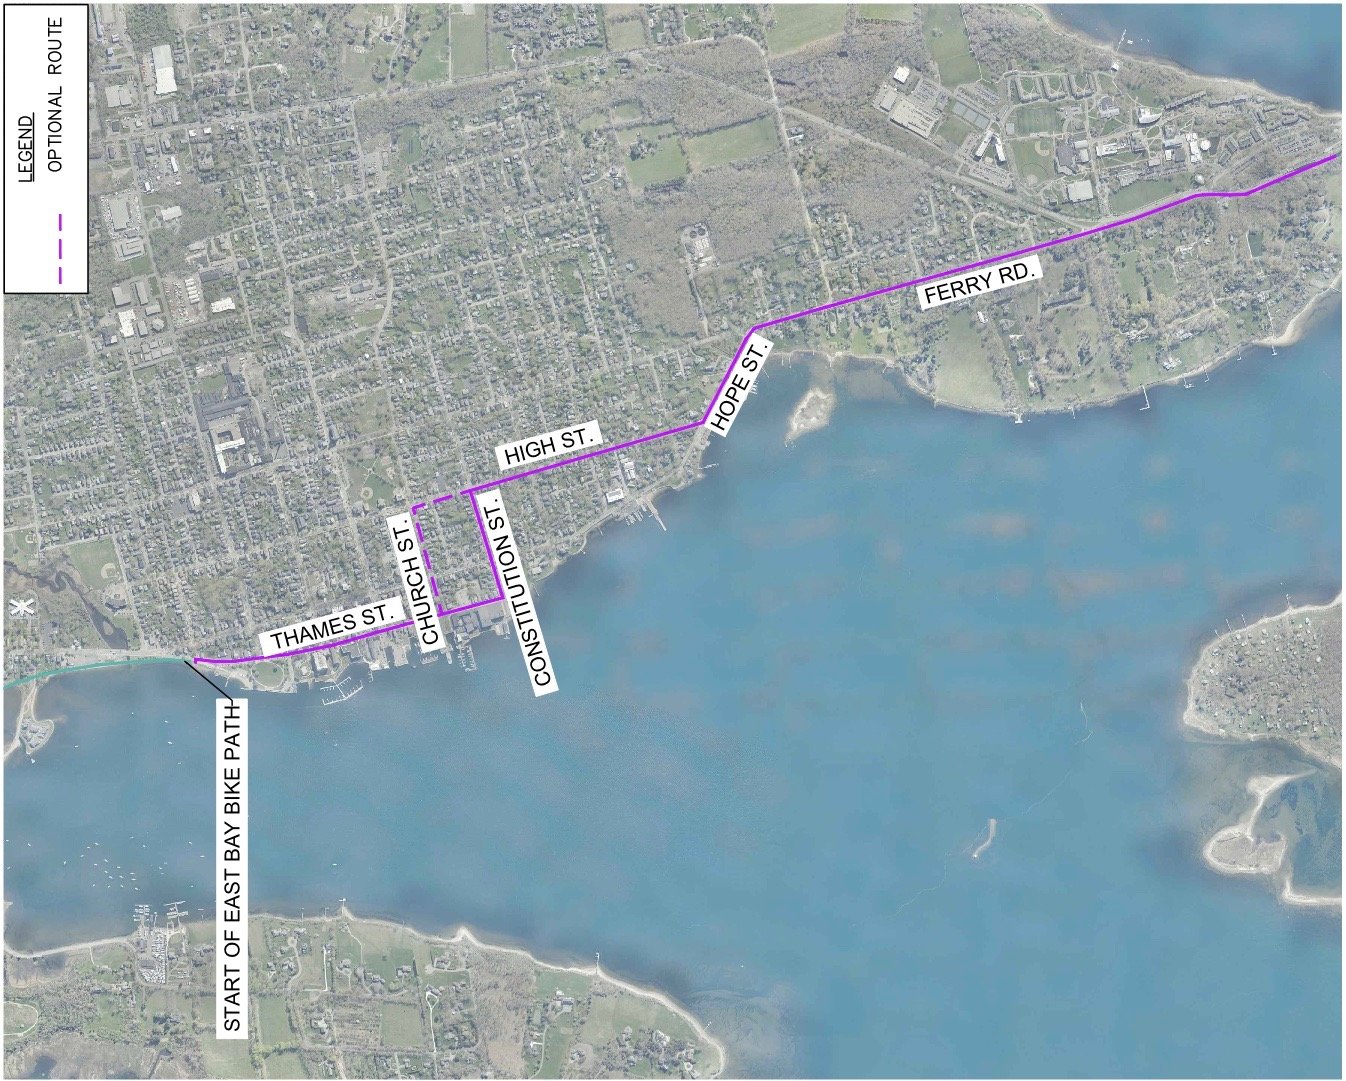 The favored bicycle route would connect from the terminus of the East Bay Bike Path (left and north), to Thames Street, then High Street, then Ferry Road, Roger Williams University and the Mt. Hope Bridge (right and south).